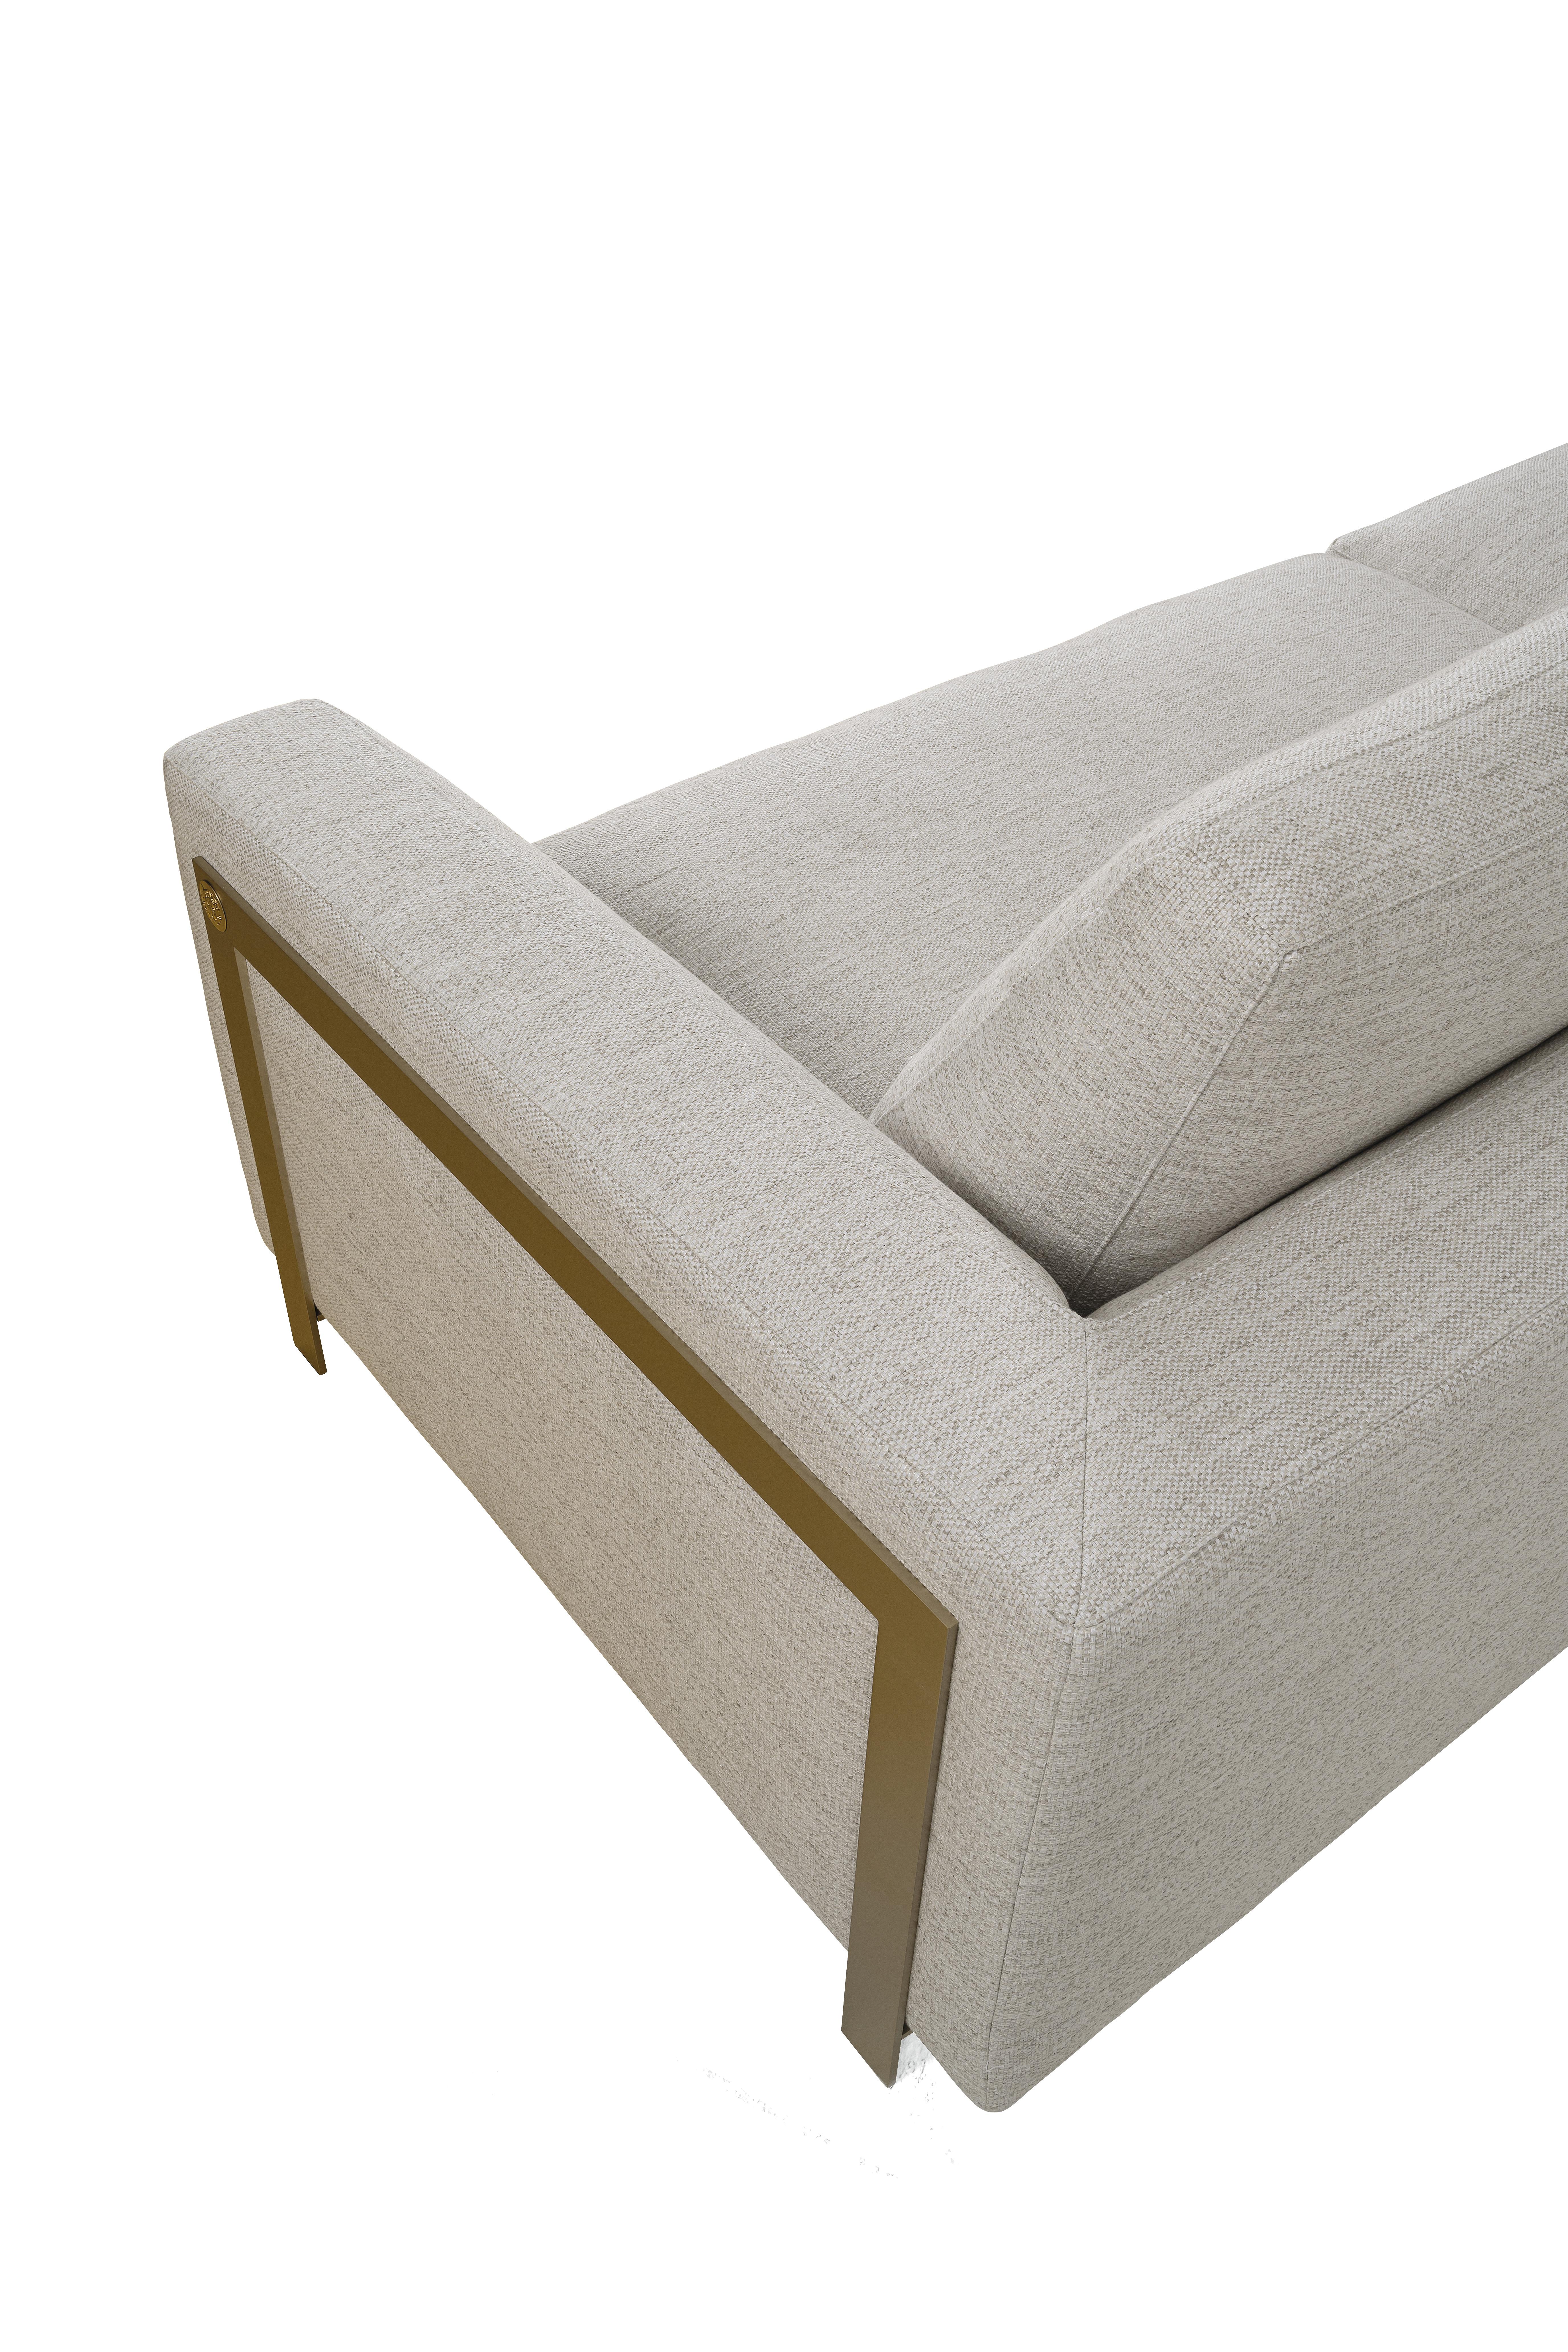 21st Century Manhattan Sofa in Fabric by Roberto Cavalli Home Interiors In New Condition For Sale In Cantù, Lombardia